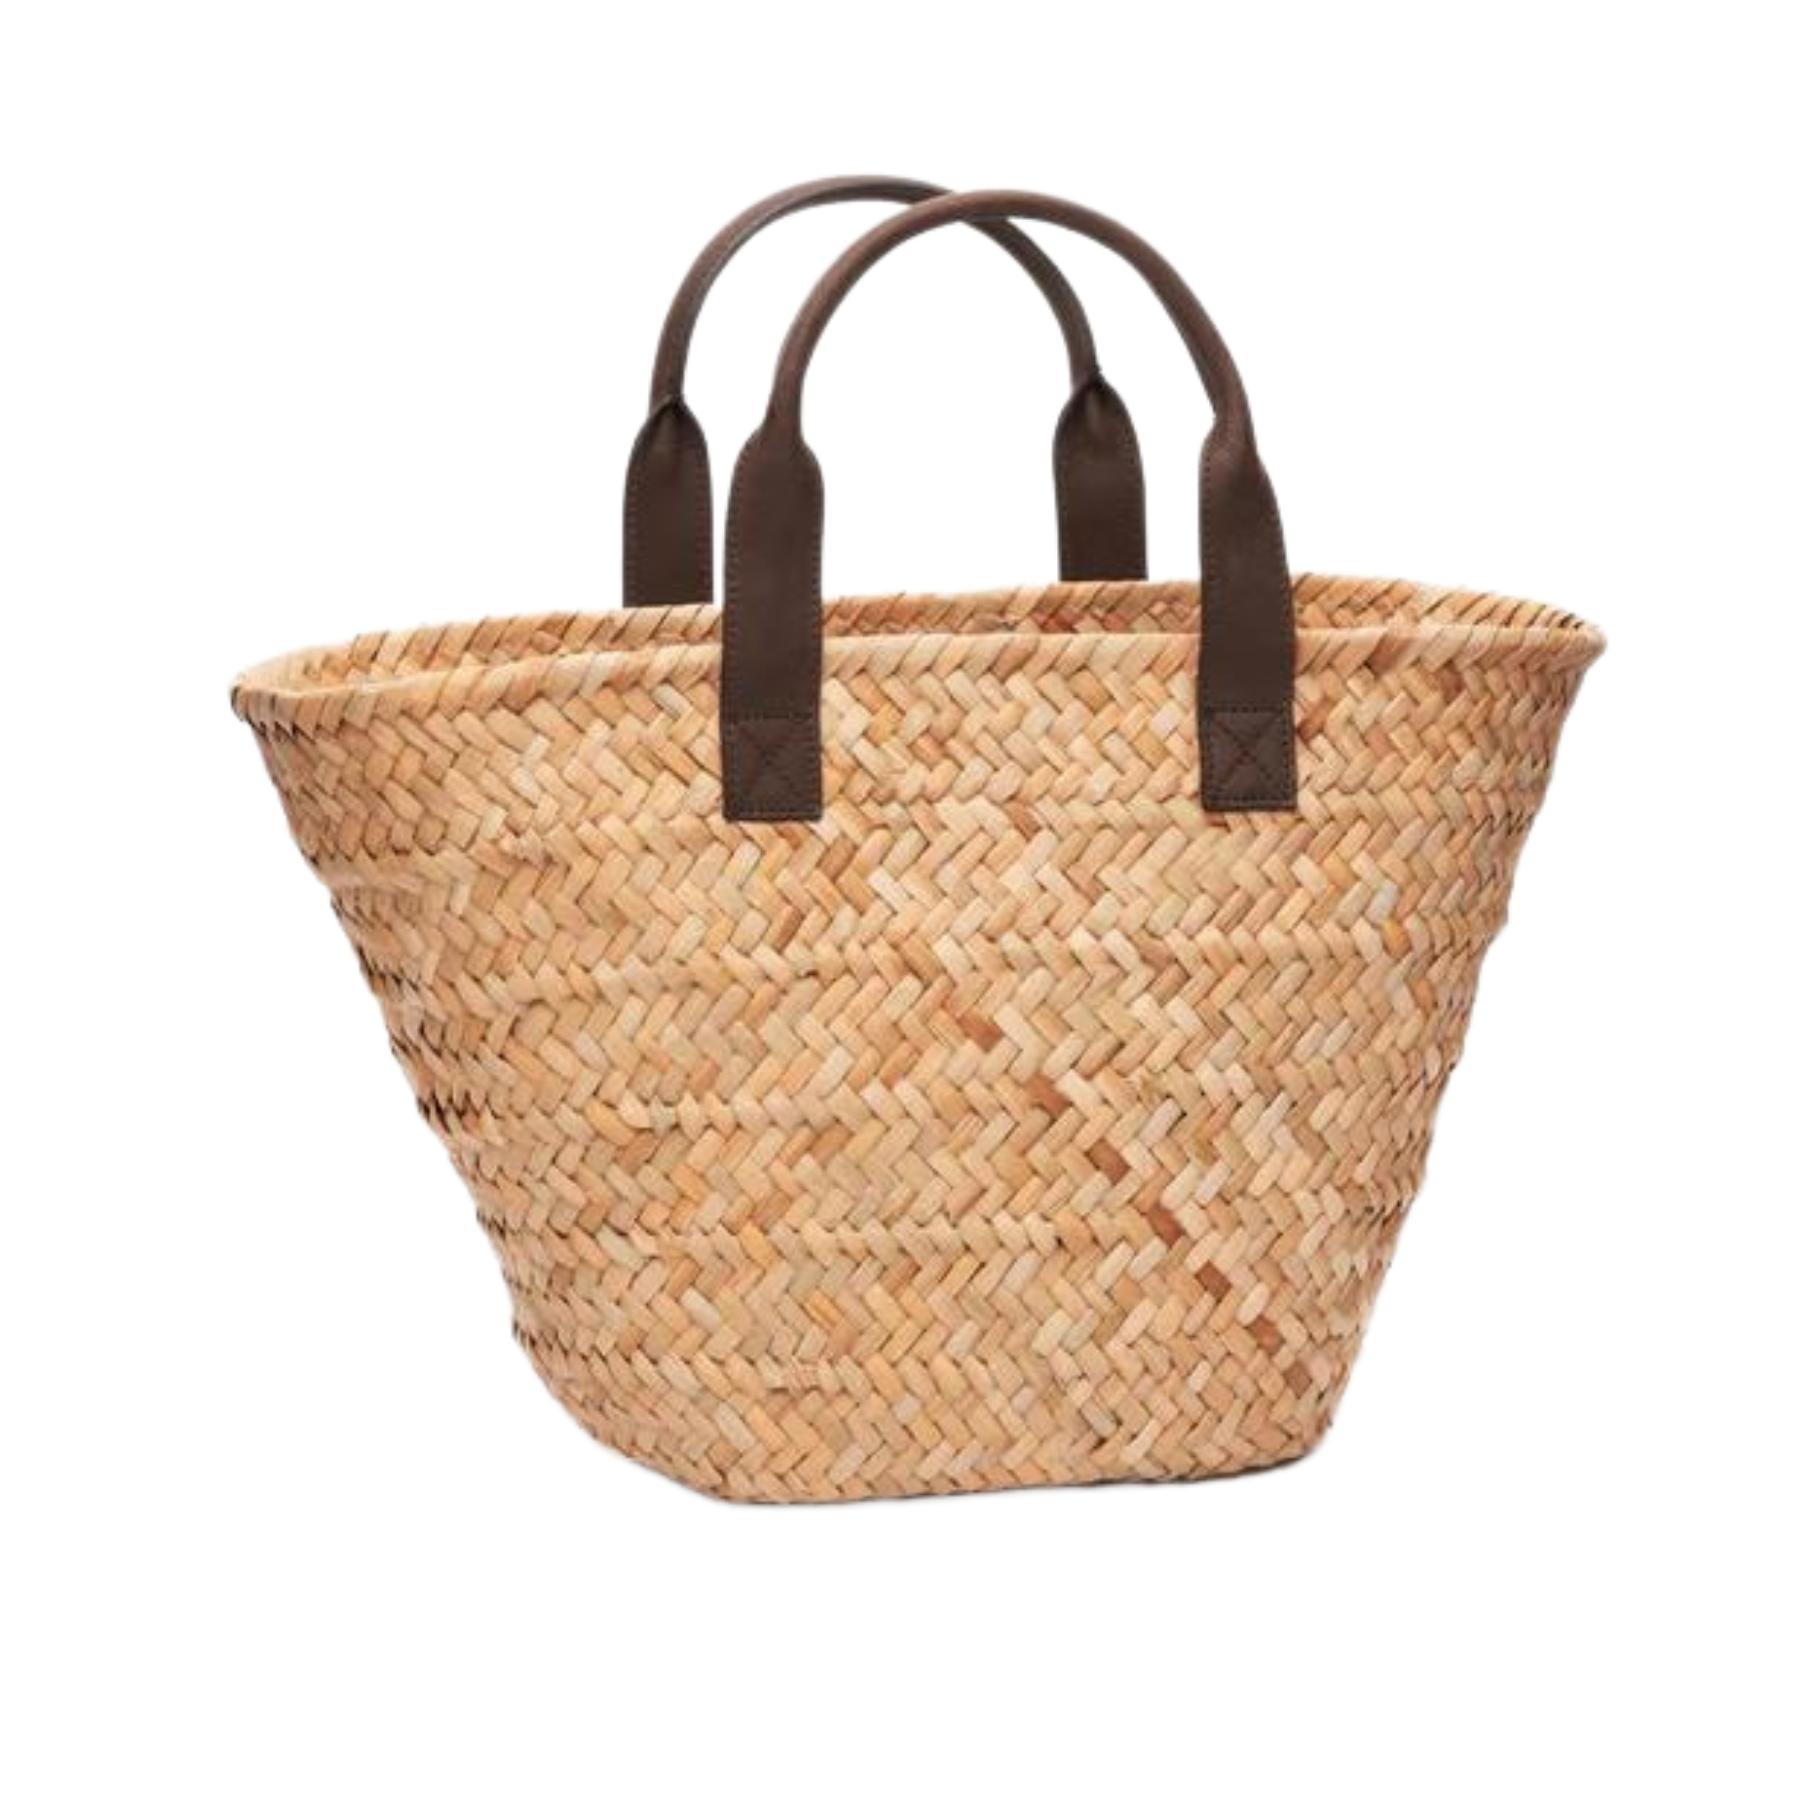 30 Straw Bags & Woven Totes For A Fashionable Entrance - The Mom Edit